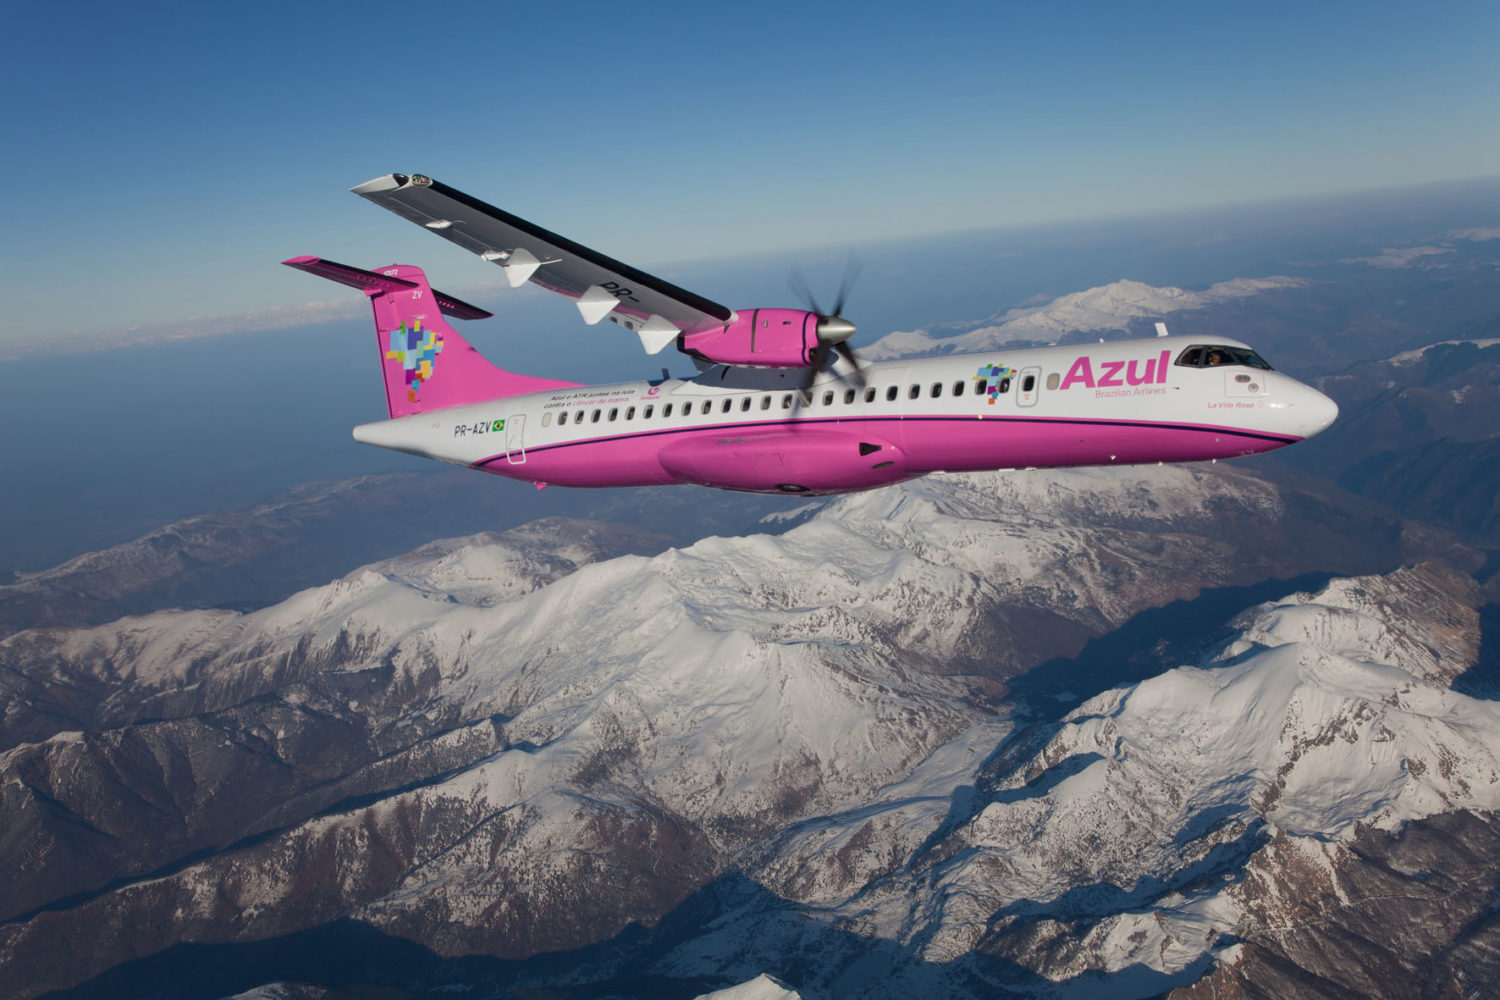 Azul pink plane promotes breast cancer awareness